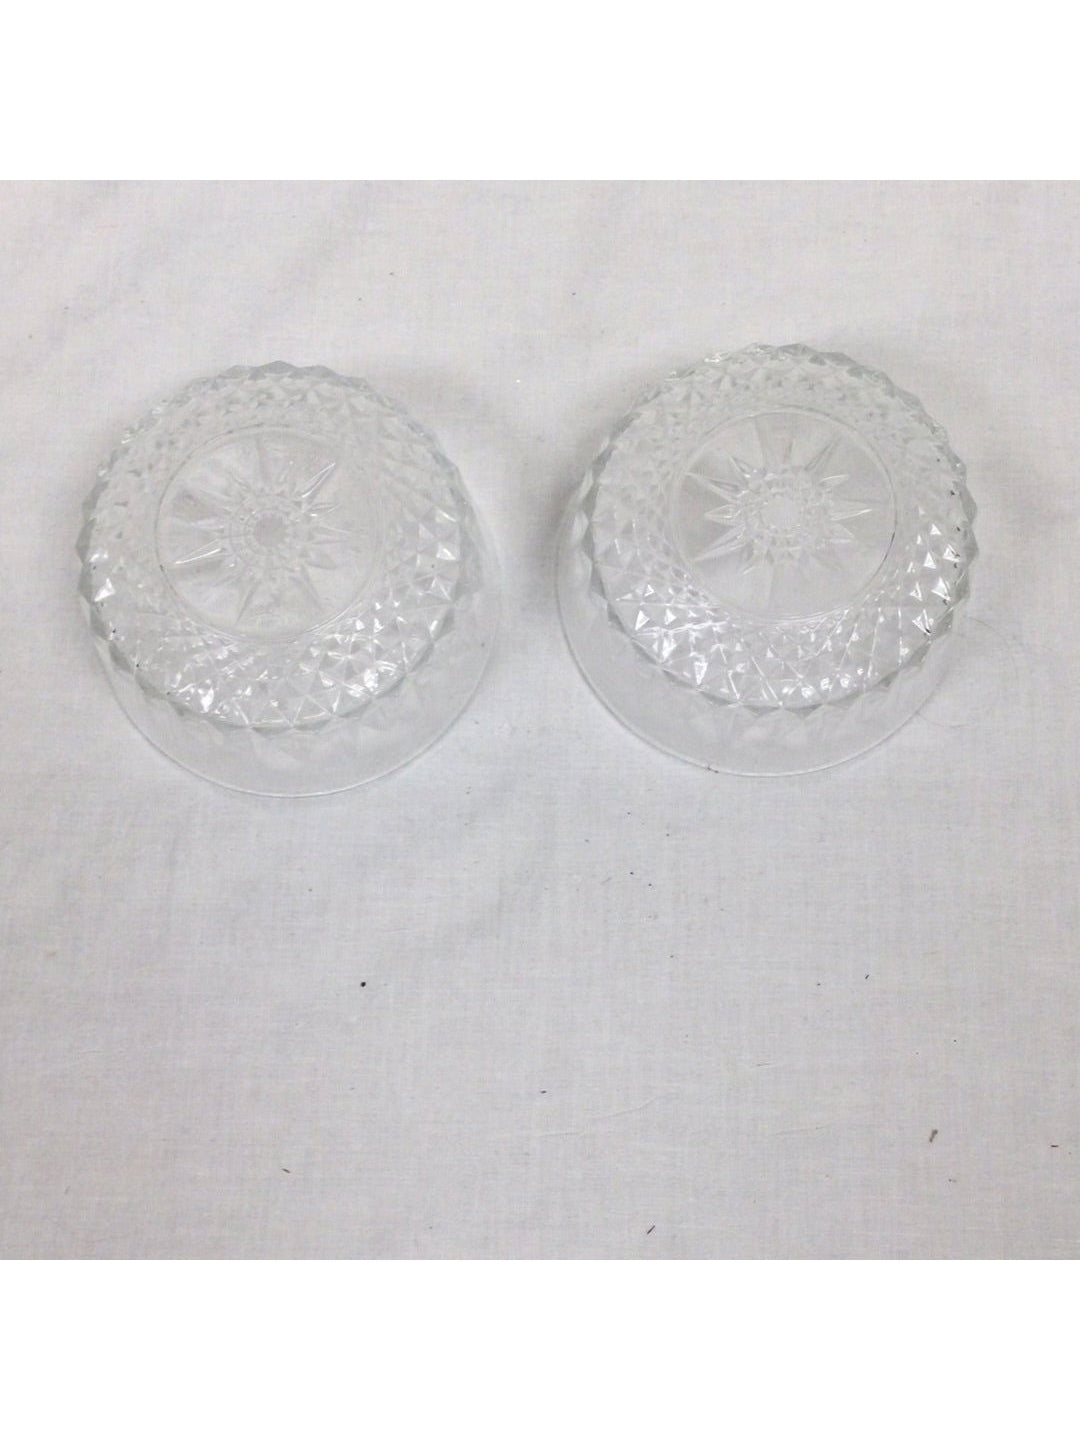 Candy Bowl Glass Wear - Set of 2 - The Kennedy Collective Thrift - 